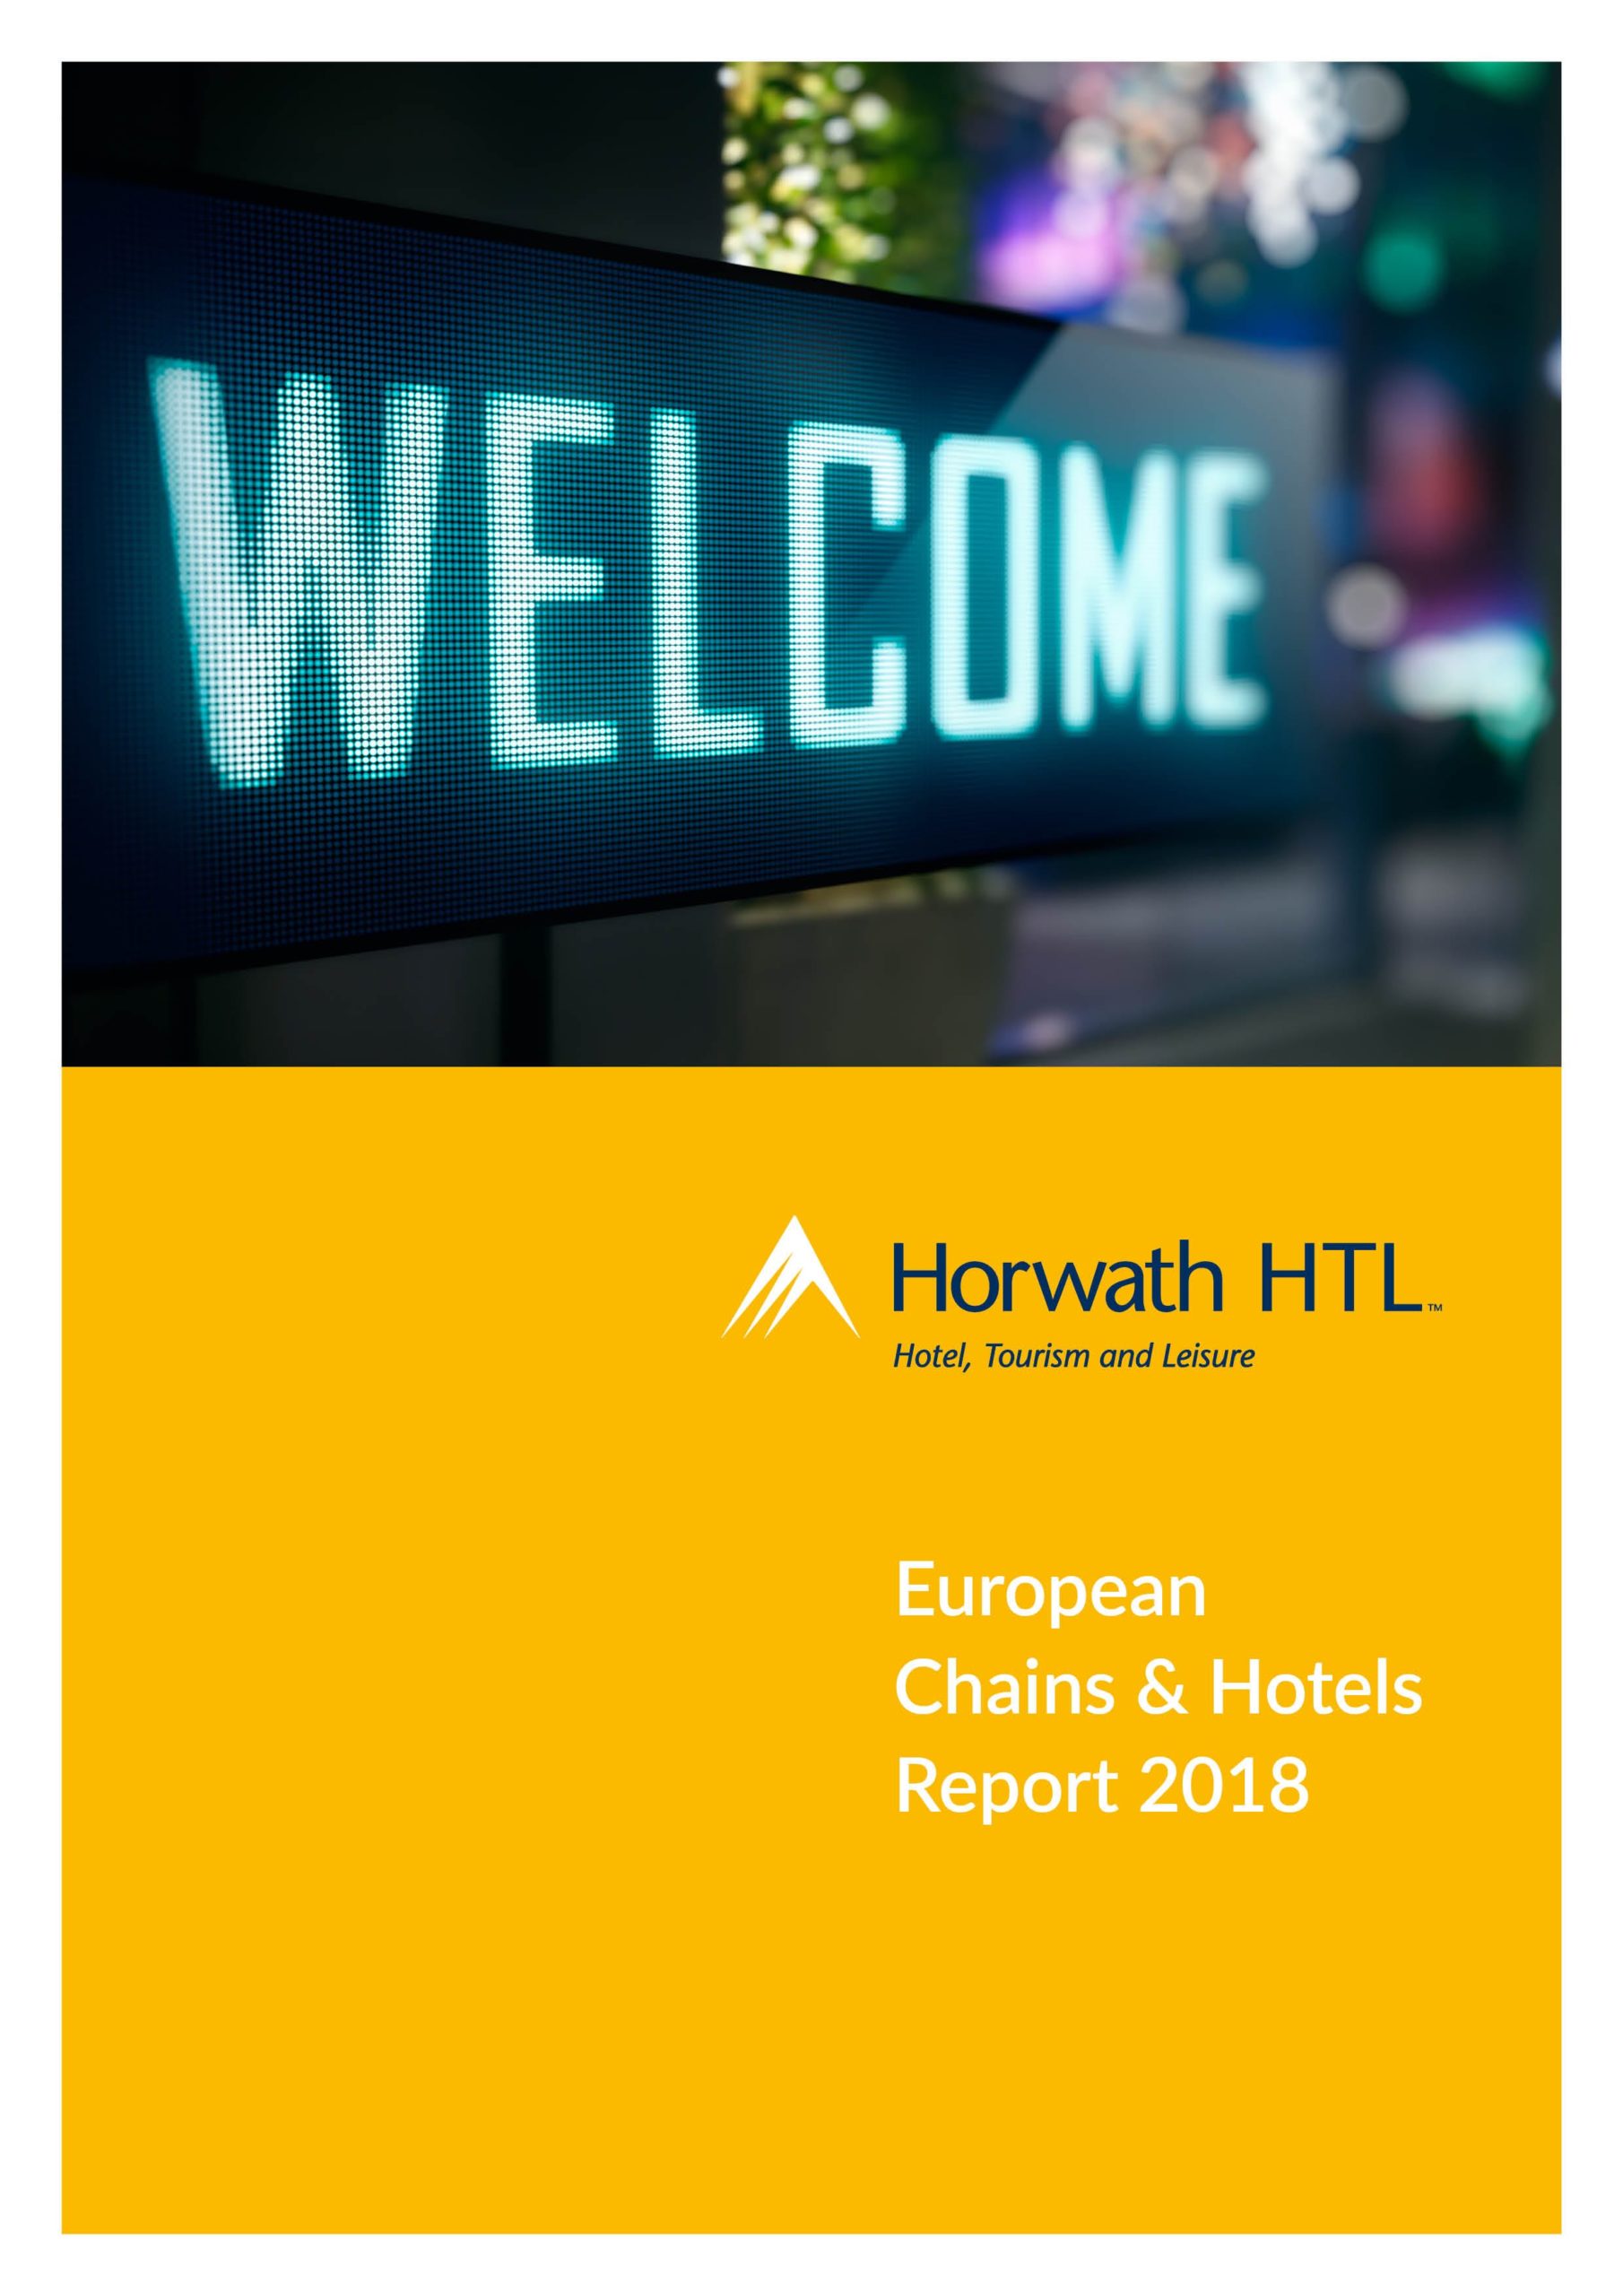 European Chains & Hotels Report 2018